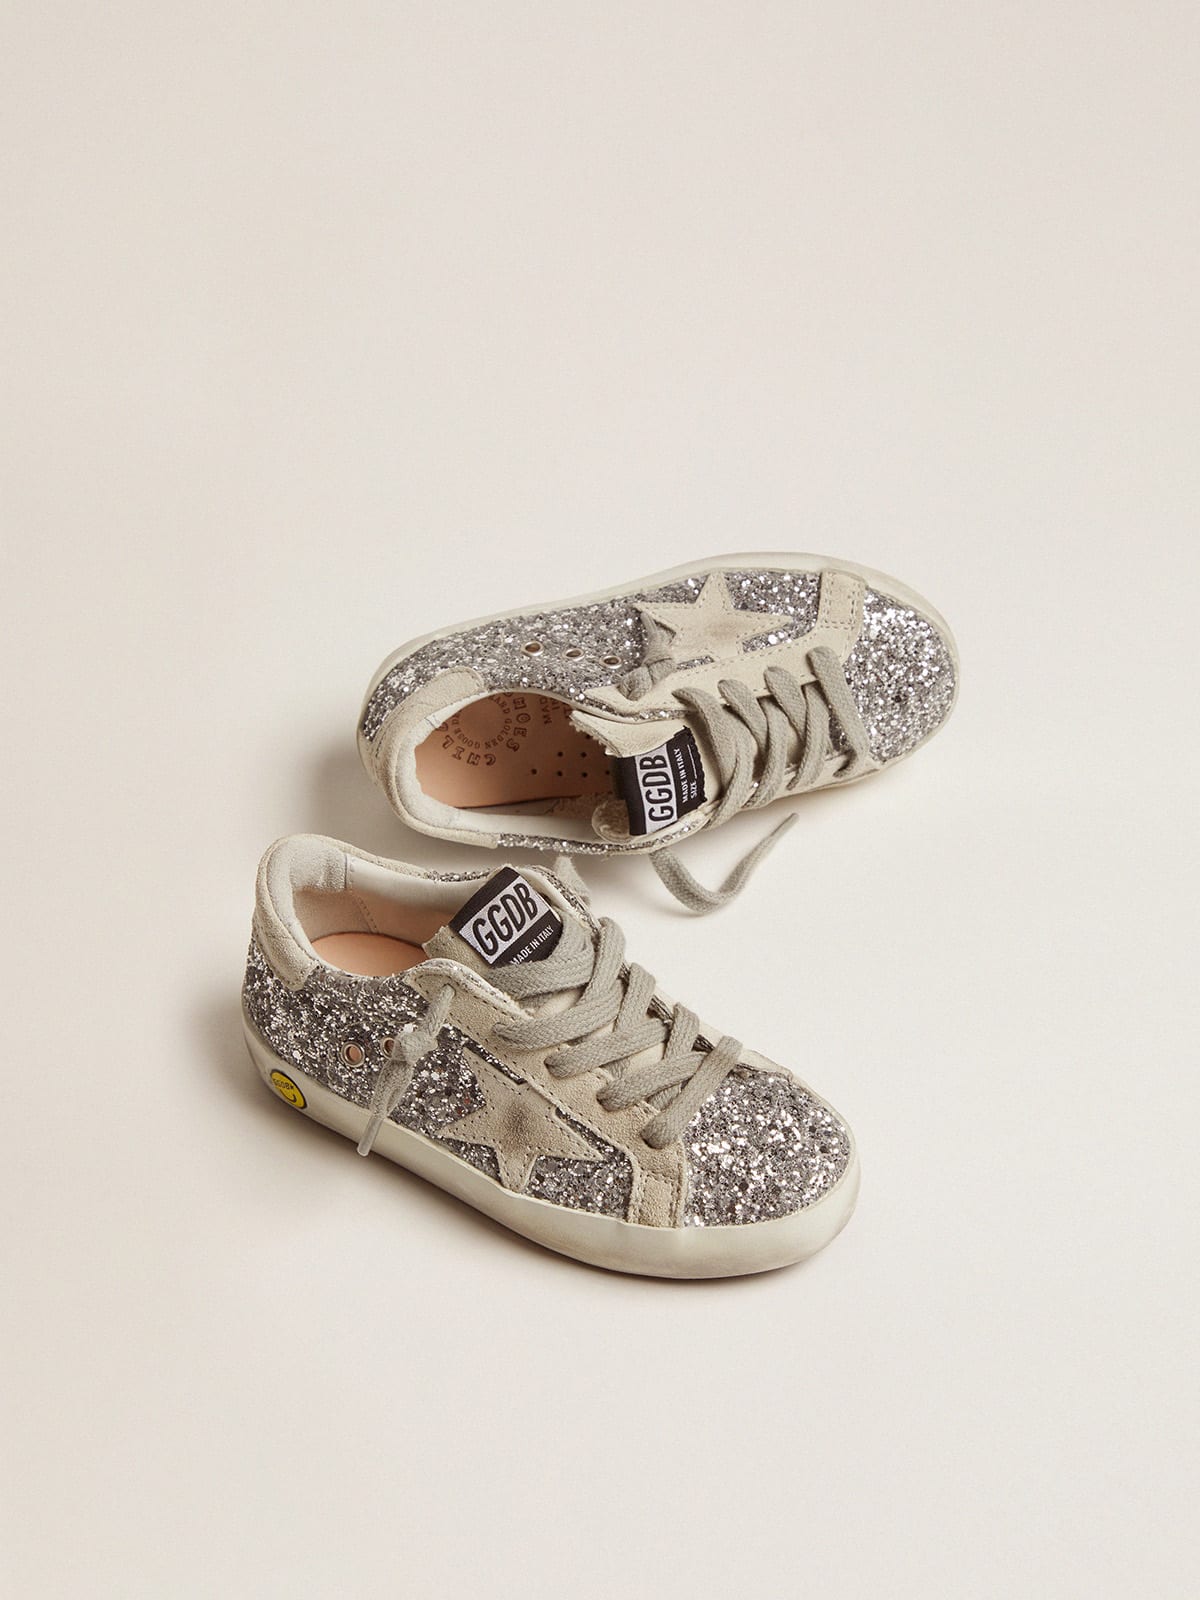 Golden Goose - Super-Star sneakers with silver glitter and suede inserts in 